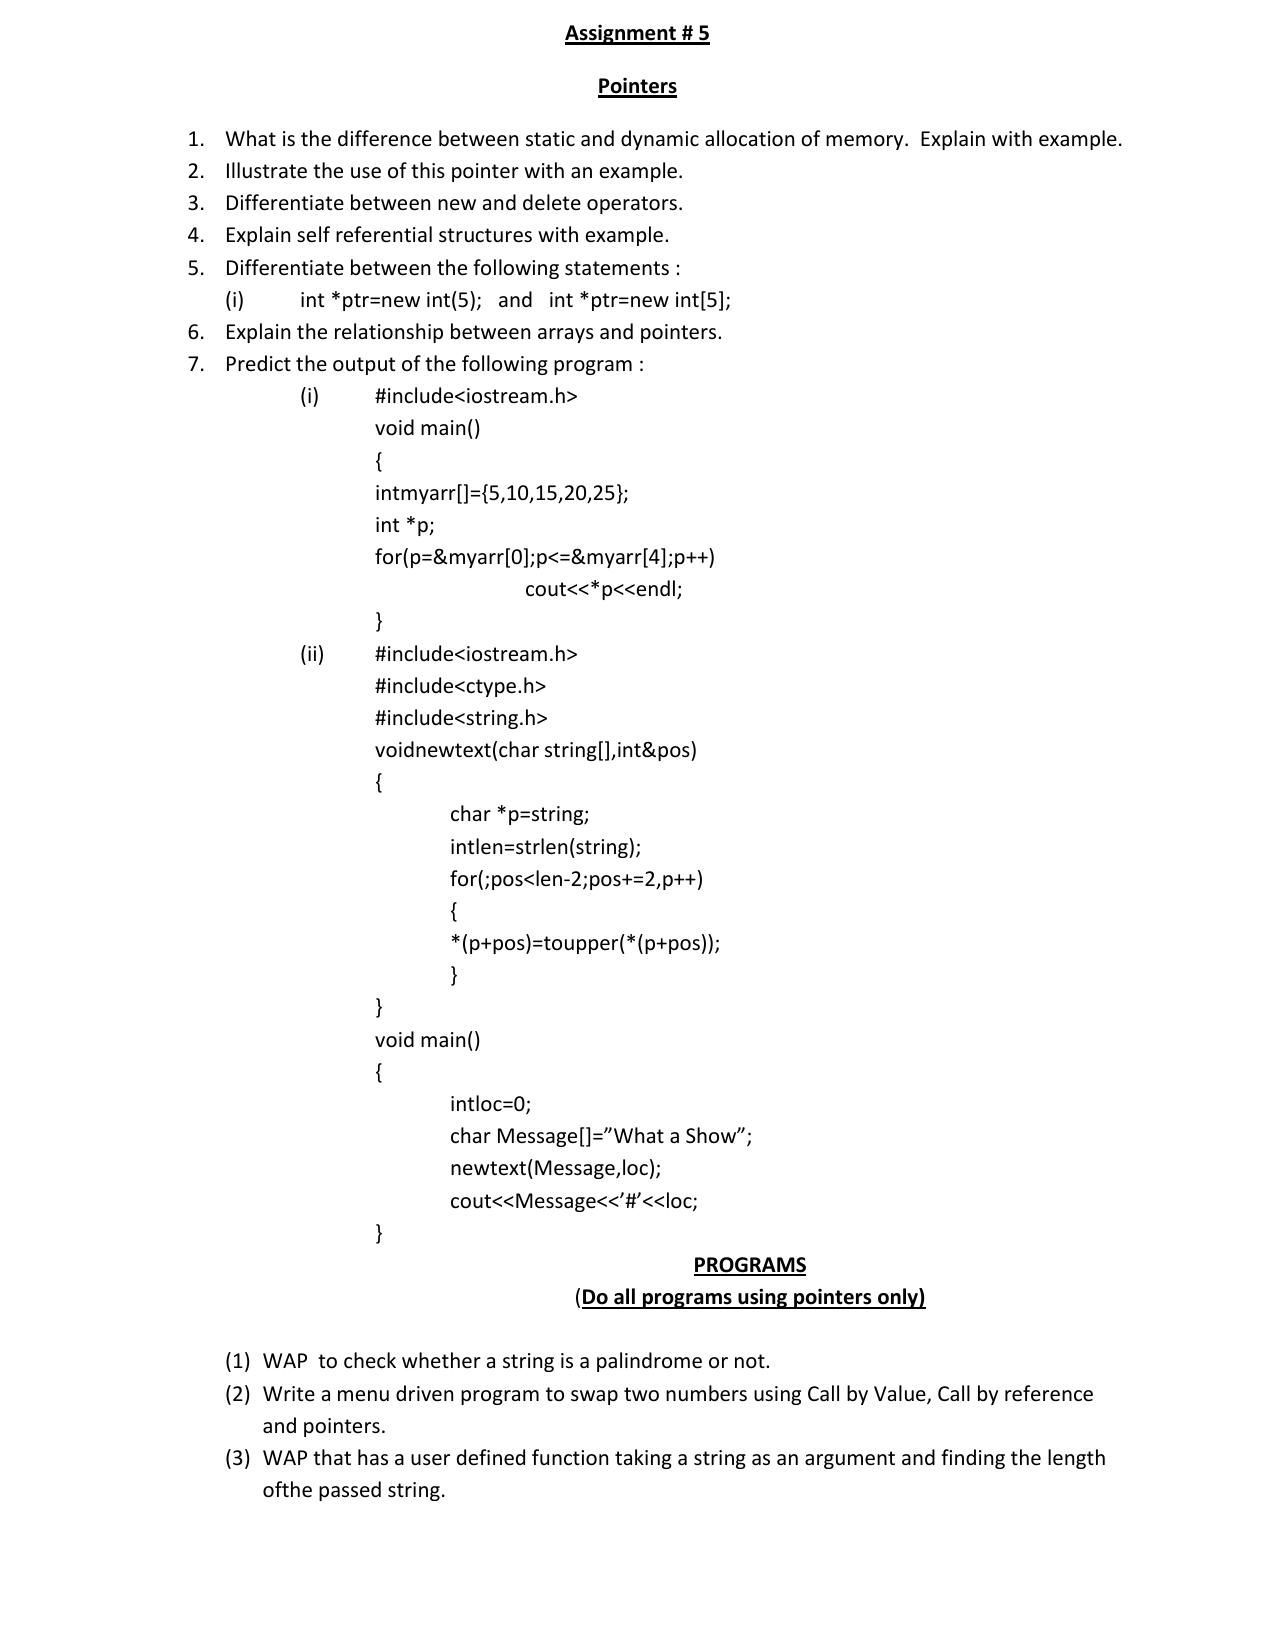 CBSE Worksheets for Class 11 Computer Science Pointers Assignment - Page 1